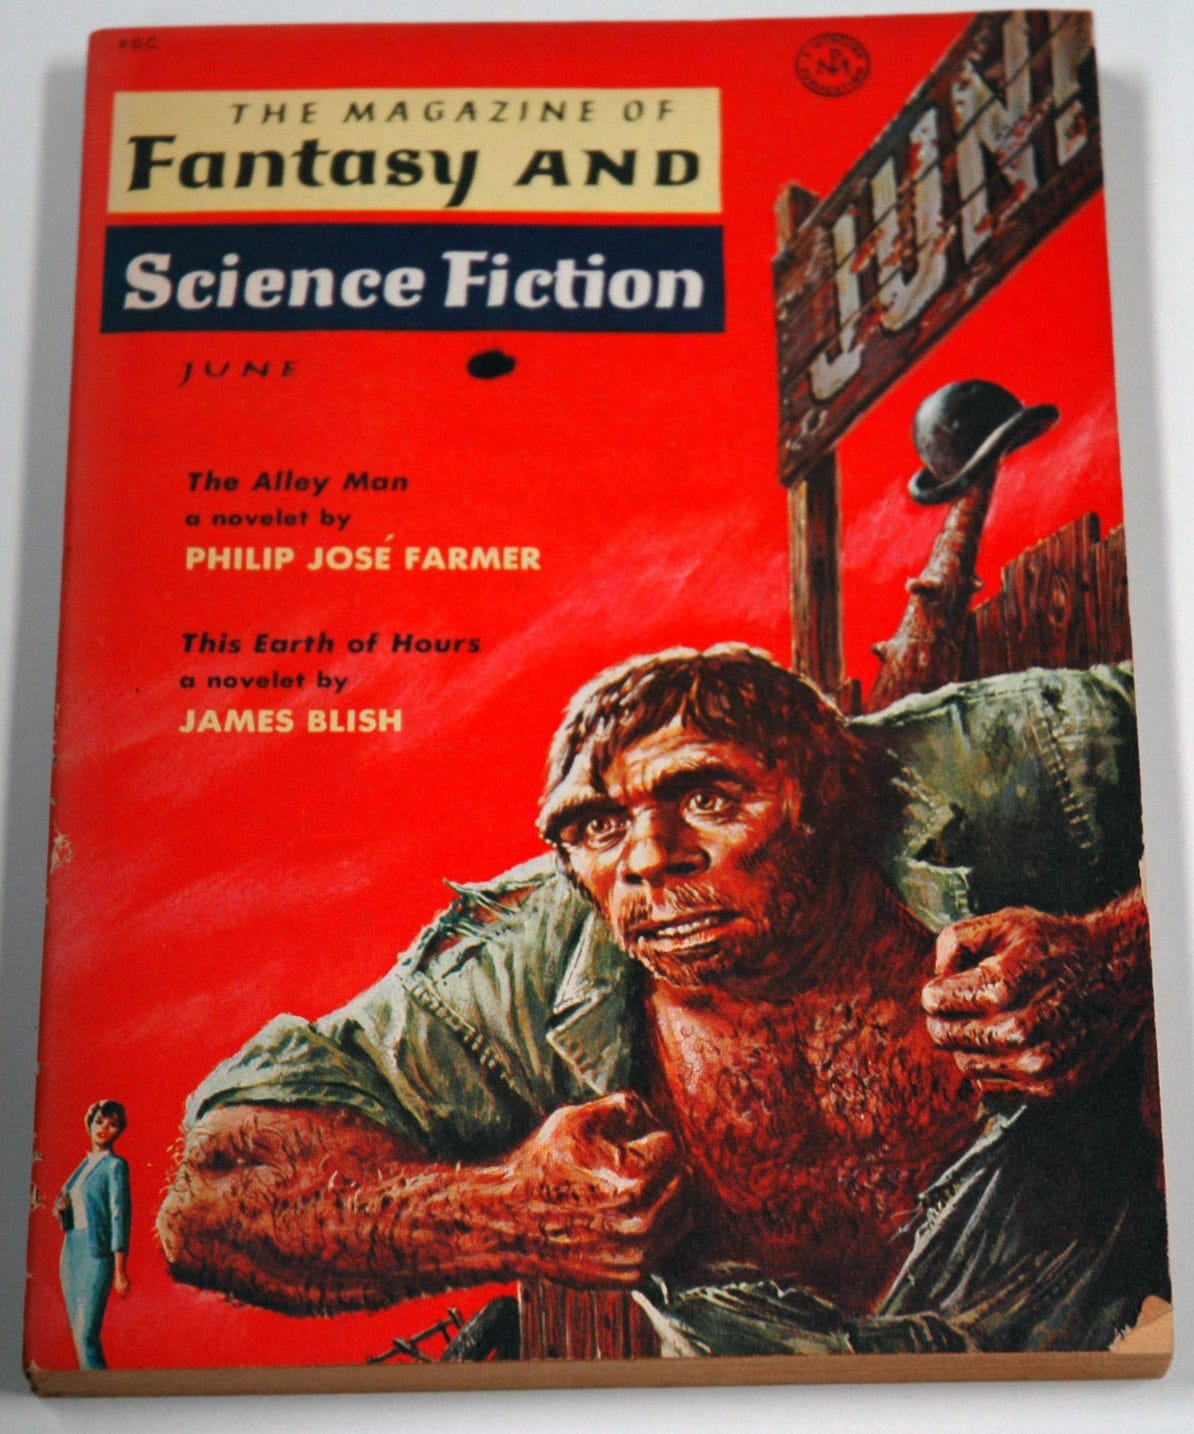 FANTASY AND SCIENCE FICTION JUNE 1959, Vol. ...